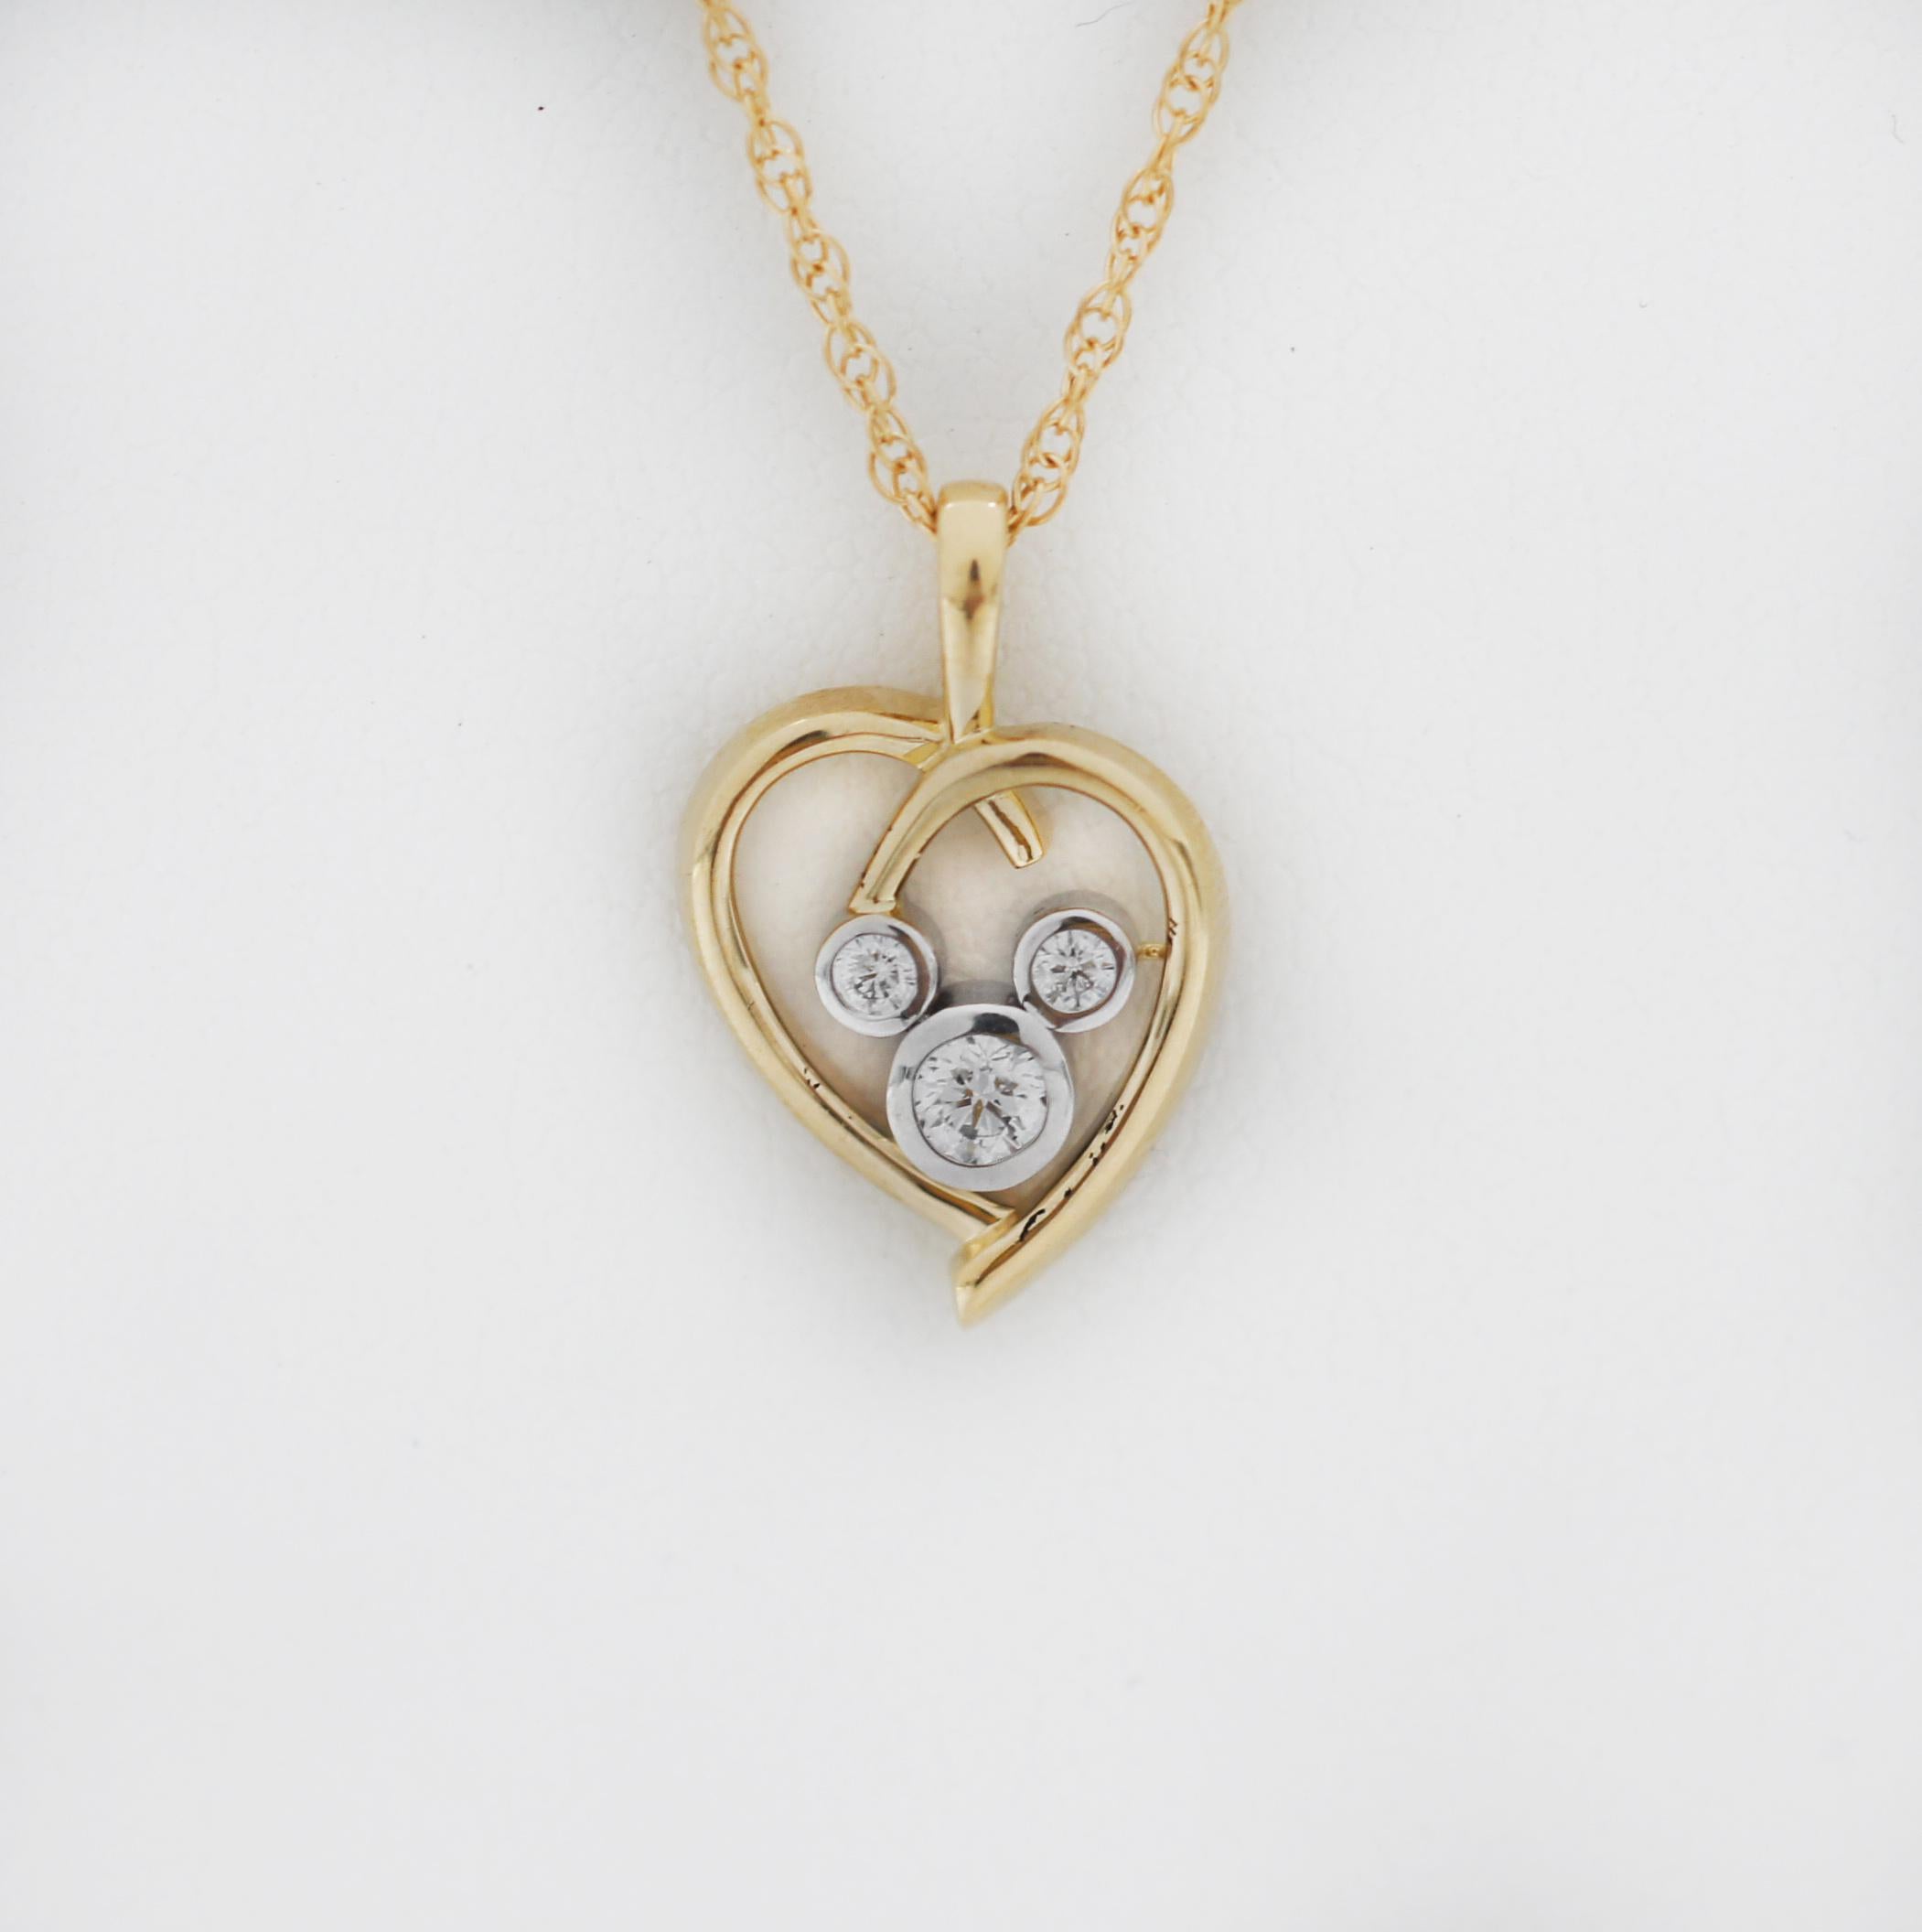 (c) Disney
A diamond-encrusted Mickey icon dazzles within the 14 karat gold heart of this Mickey Mouse Necklace. For romantics and Mickey lovers everywhere, this elegant necklace will provide a lifetime of golden moments.
Magic in the